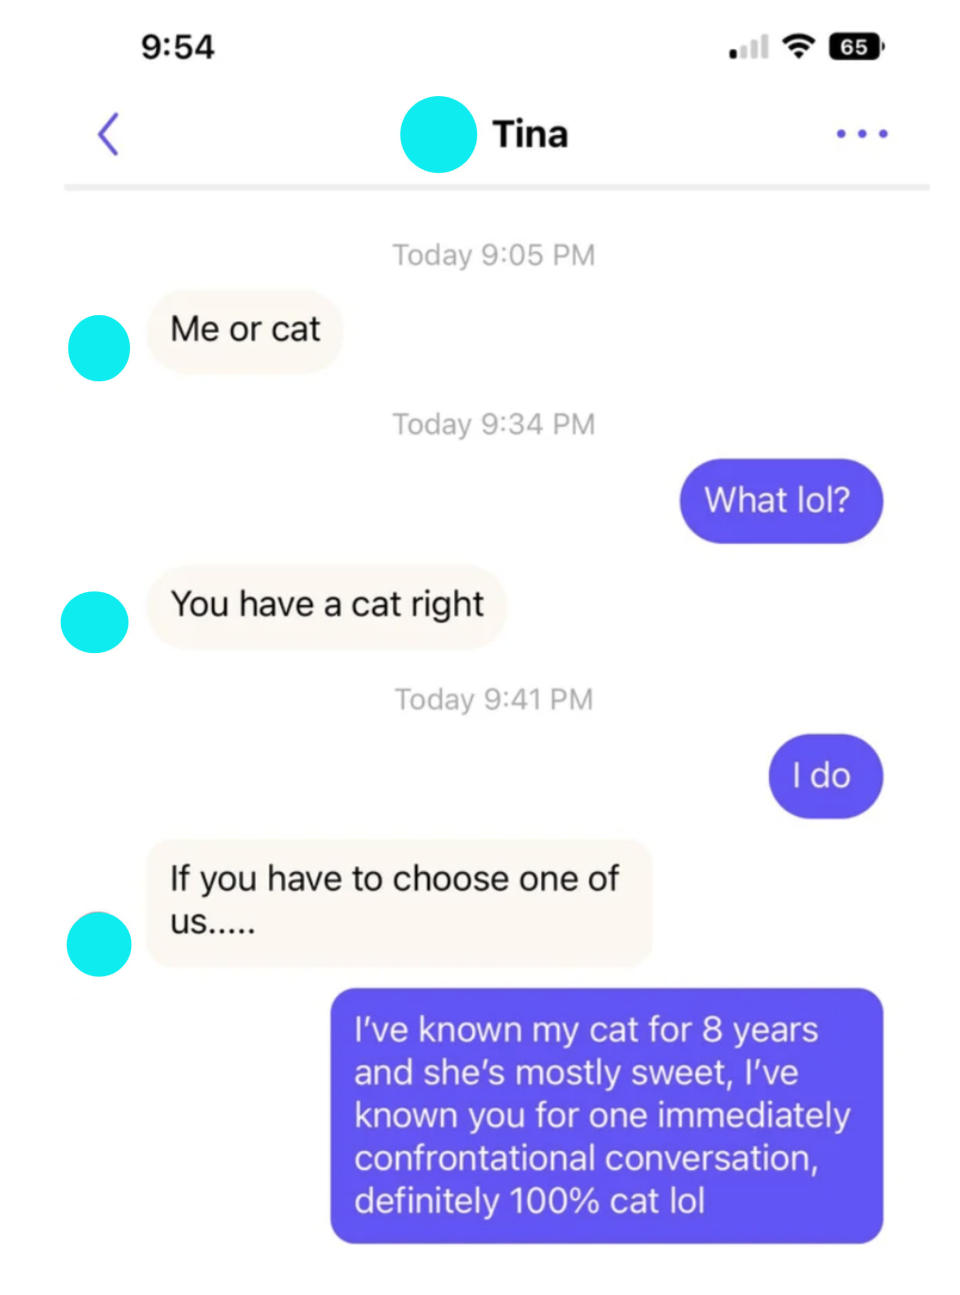 person saying they've known their cat for 8 years, so they'll pick it over a stranger